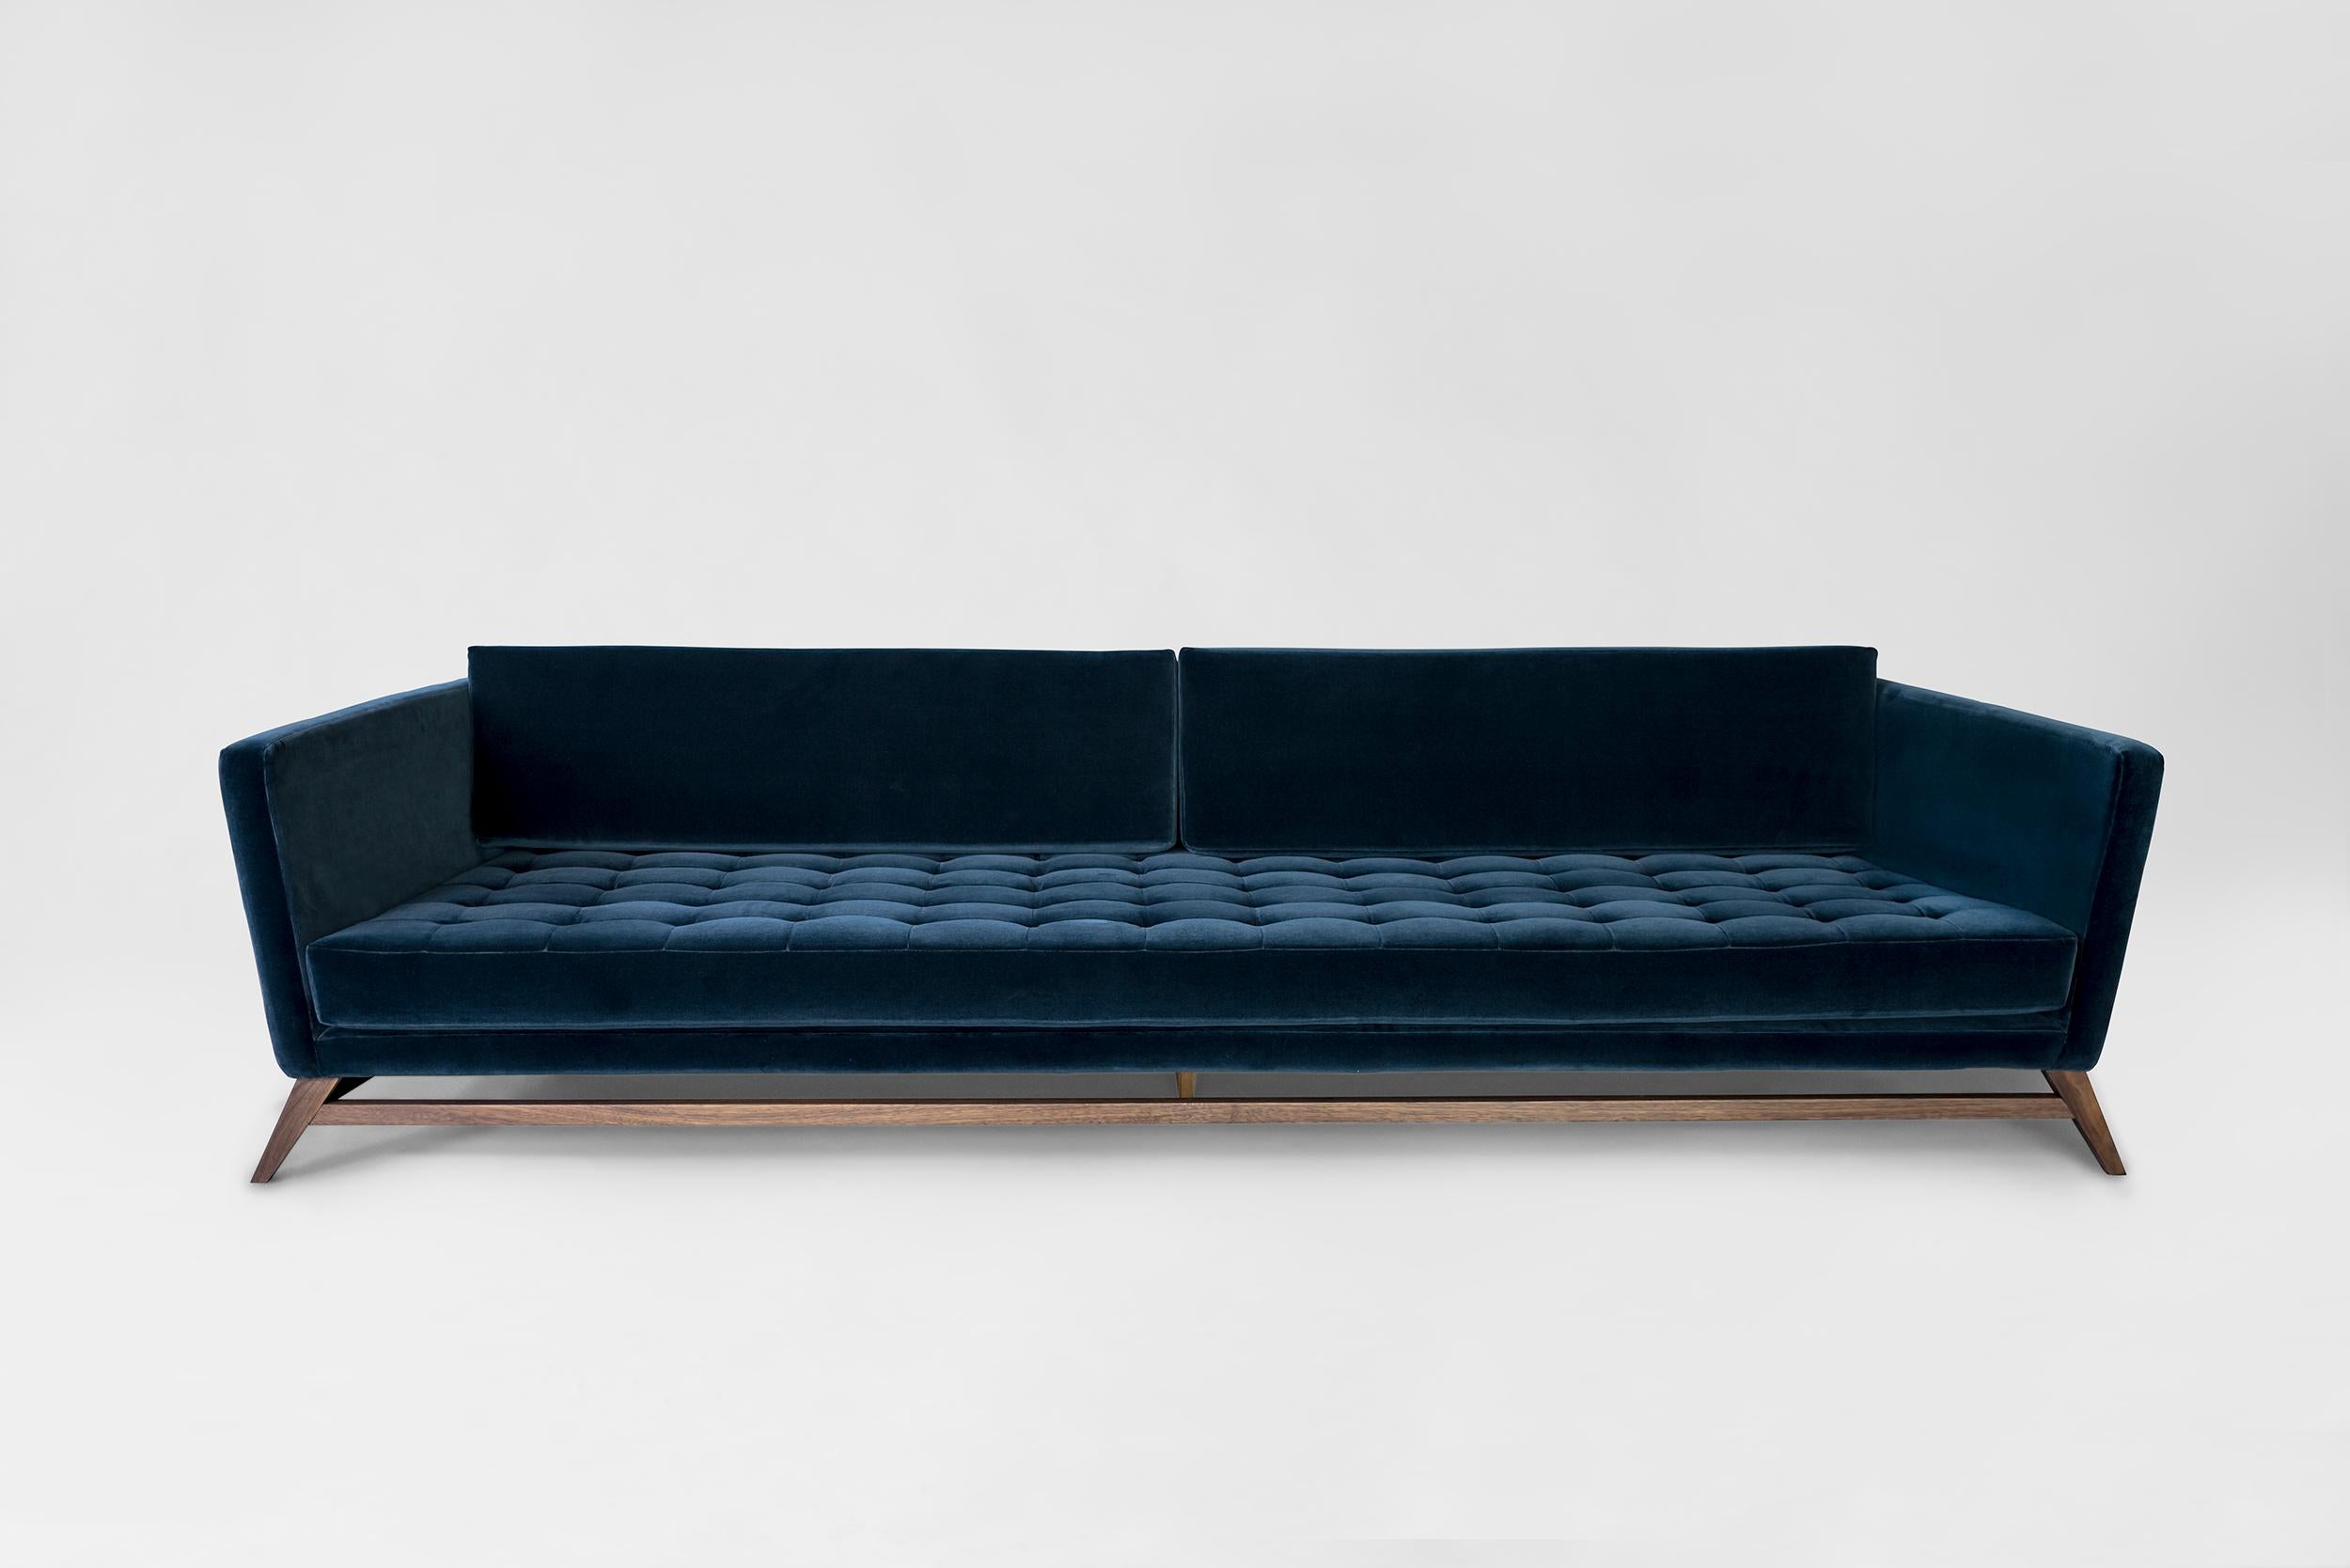 Blue Eclipse sofa by Atra Design.
Dimensions: D 220 x W 108.8 x H 79 cm.
Materials: fabric, walnut wood.
Available in other colors.

Atra Design
We are Atra, a furniture brand produced by Atra form a mexico city–based high end production